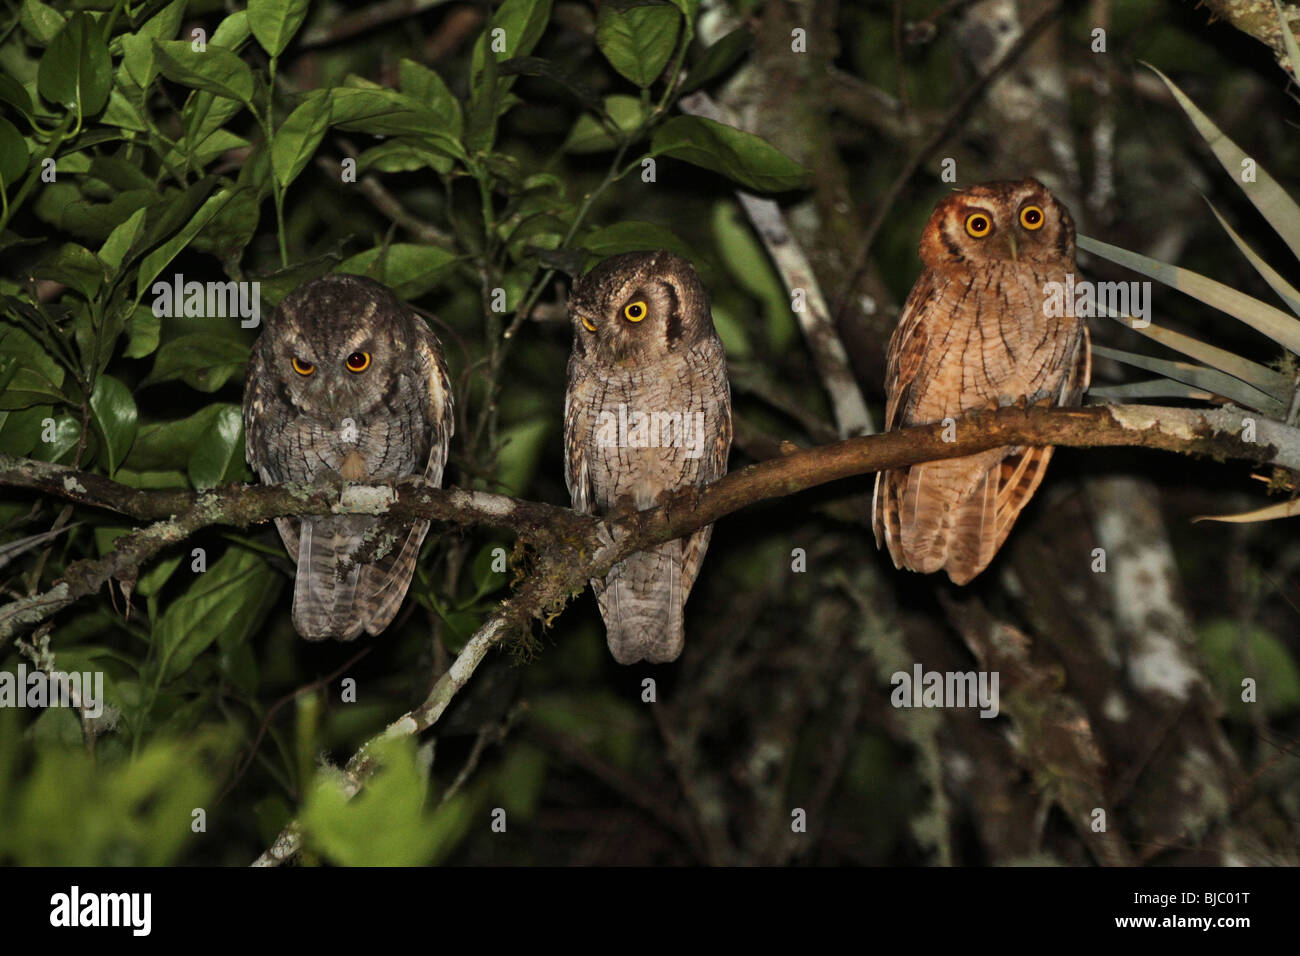 BT-262D, MOTHER AND TWO IMMATURE TROPICAL SCREECH-OWLS, Stock Photo